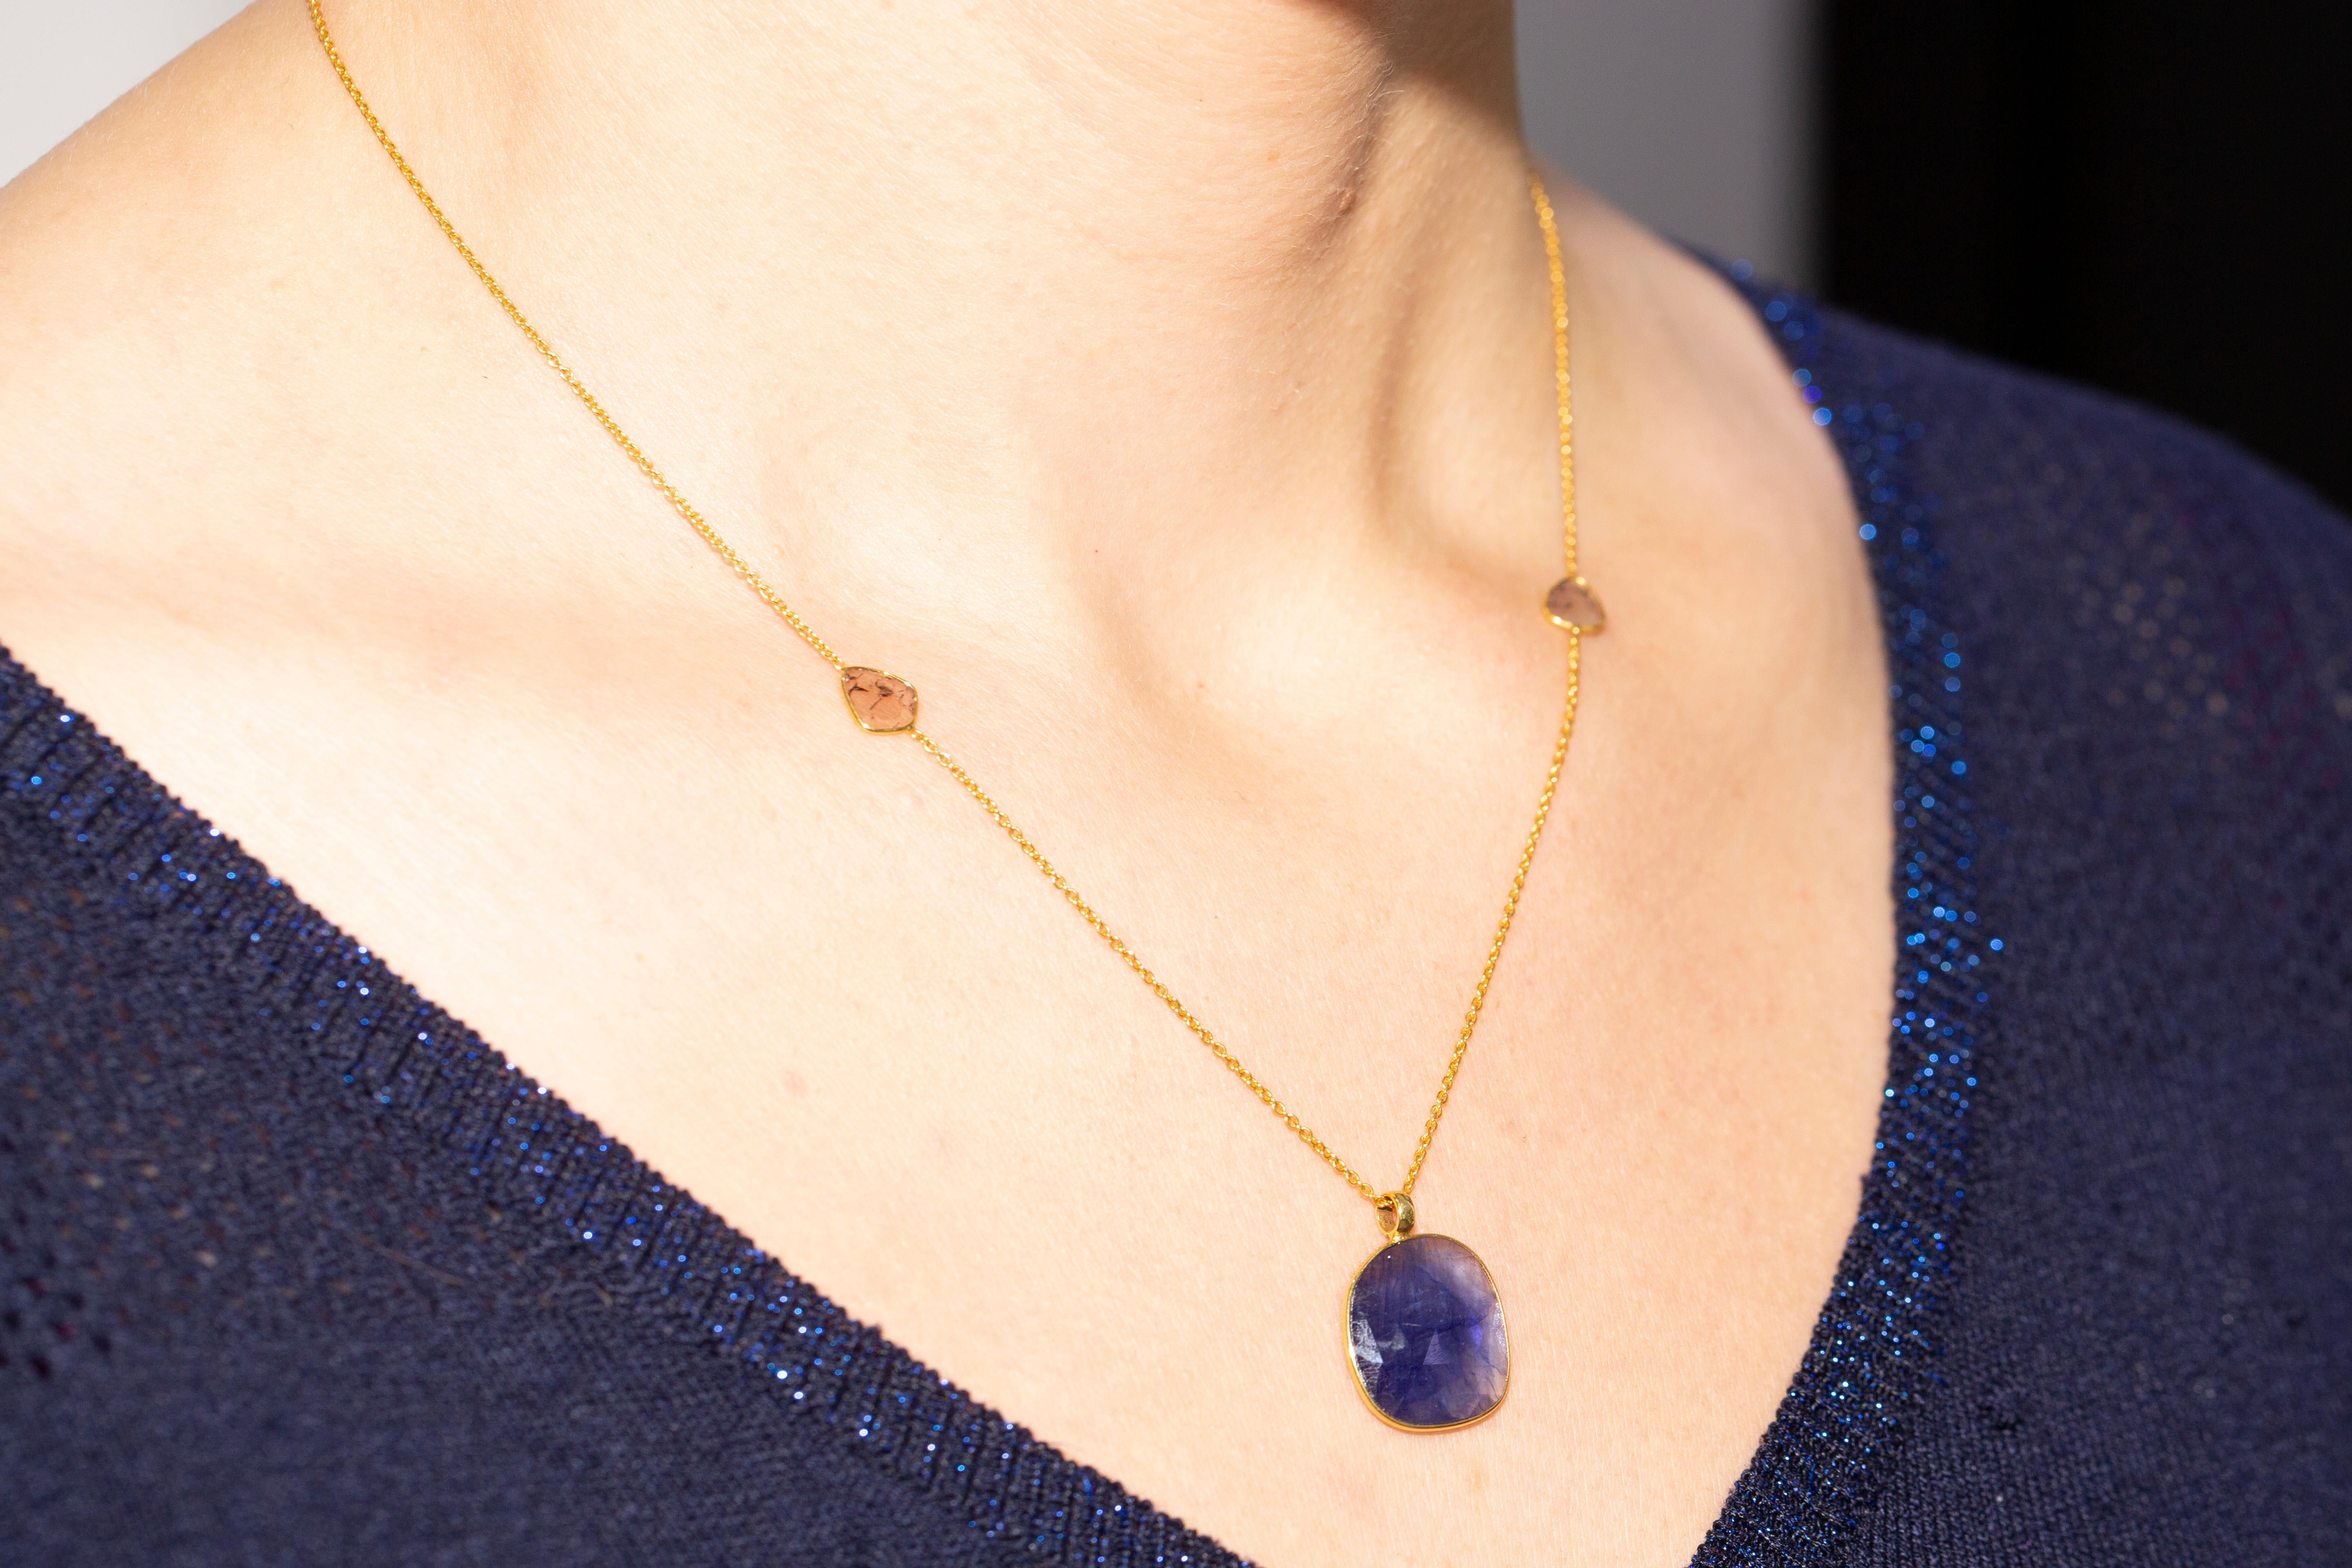 This stunning timelessly elegant rose cut 10.50 Carat Blue Sapphire from the Artisan collection is set in luxurious 18 Karat Yellow Gold chain featuring a total of 0.32 Carat Diamond slices. Each piece is hand made with a unique shaped precious